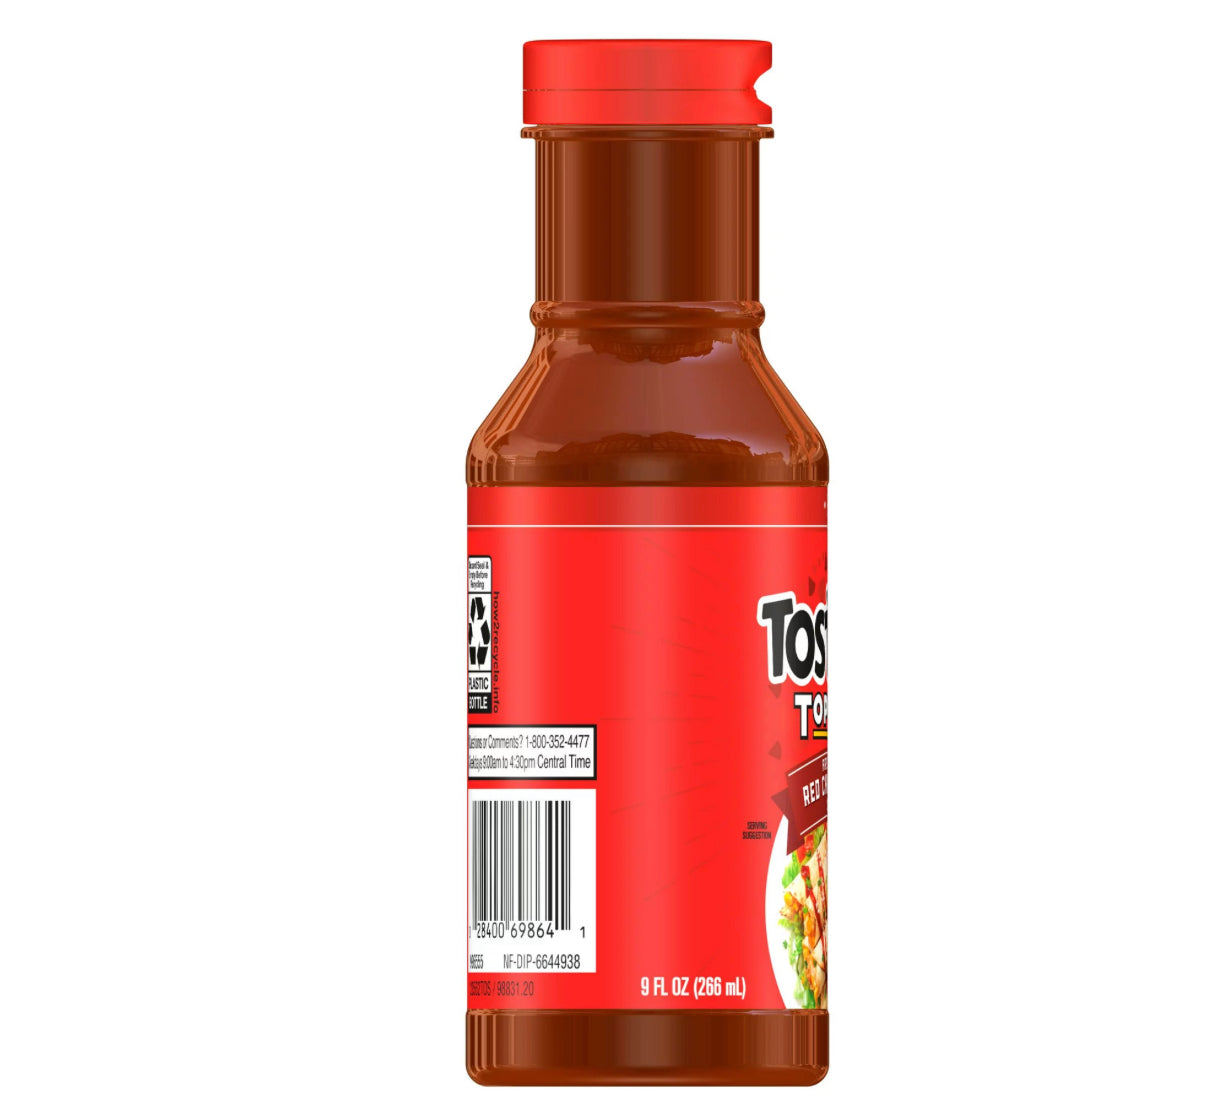 Tostitos Toppers Red Chili Pepper 9oz